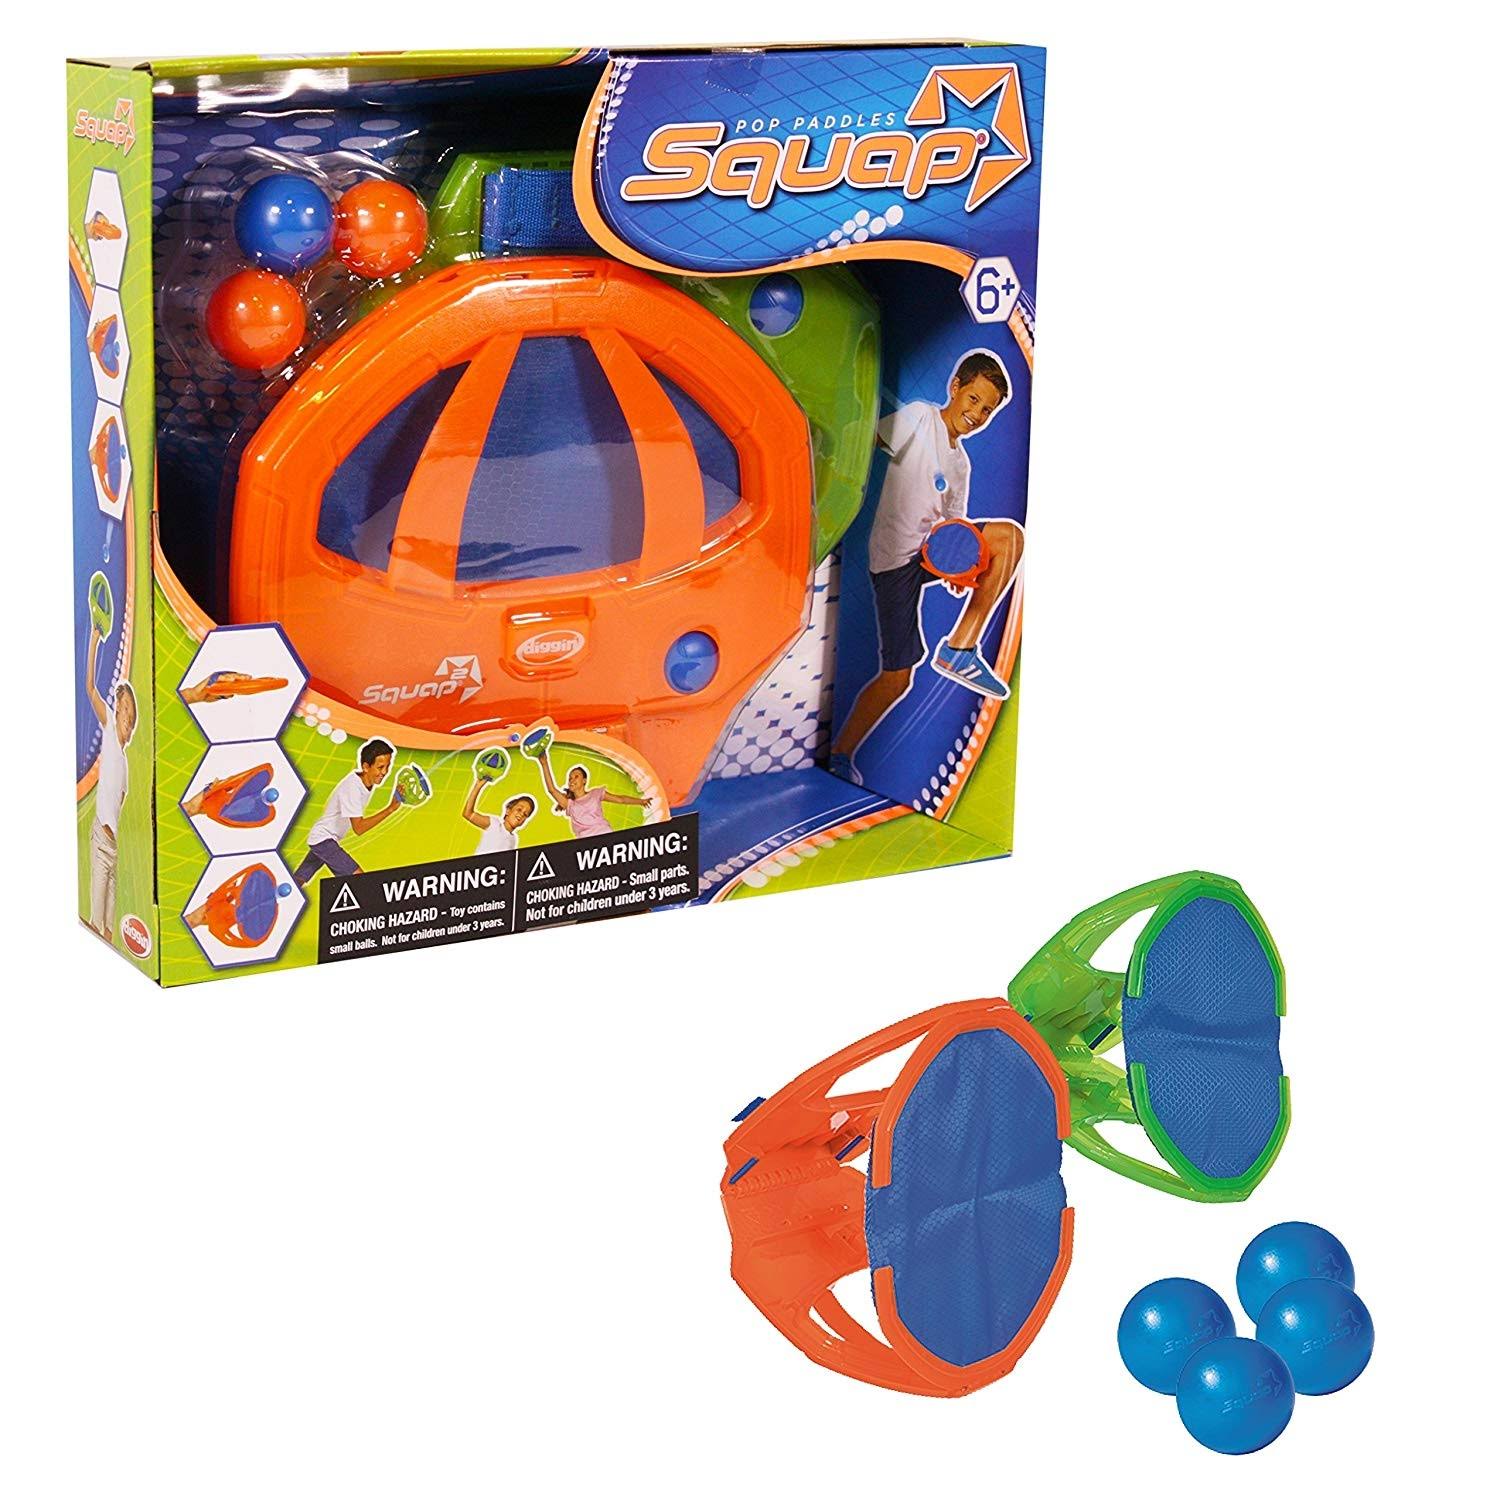 Diggin Squap Ball Toss Catch Game Set. 2 Paddle Mitts & 4 Balls